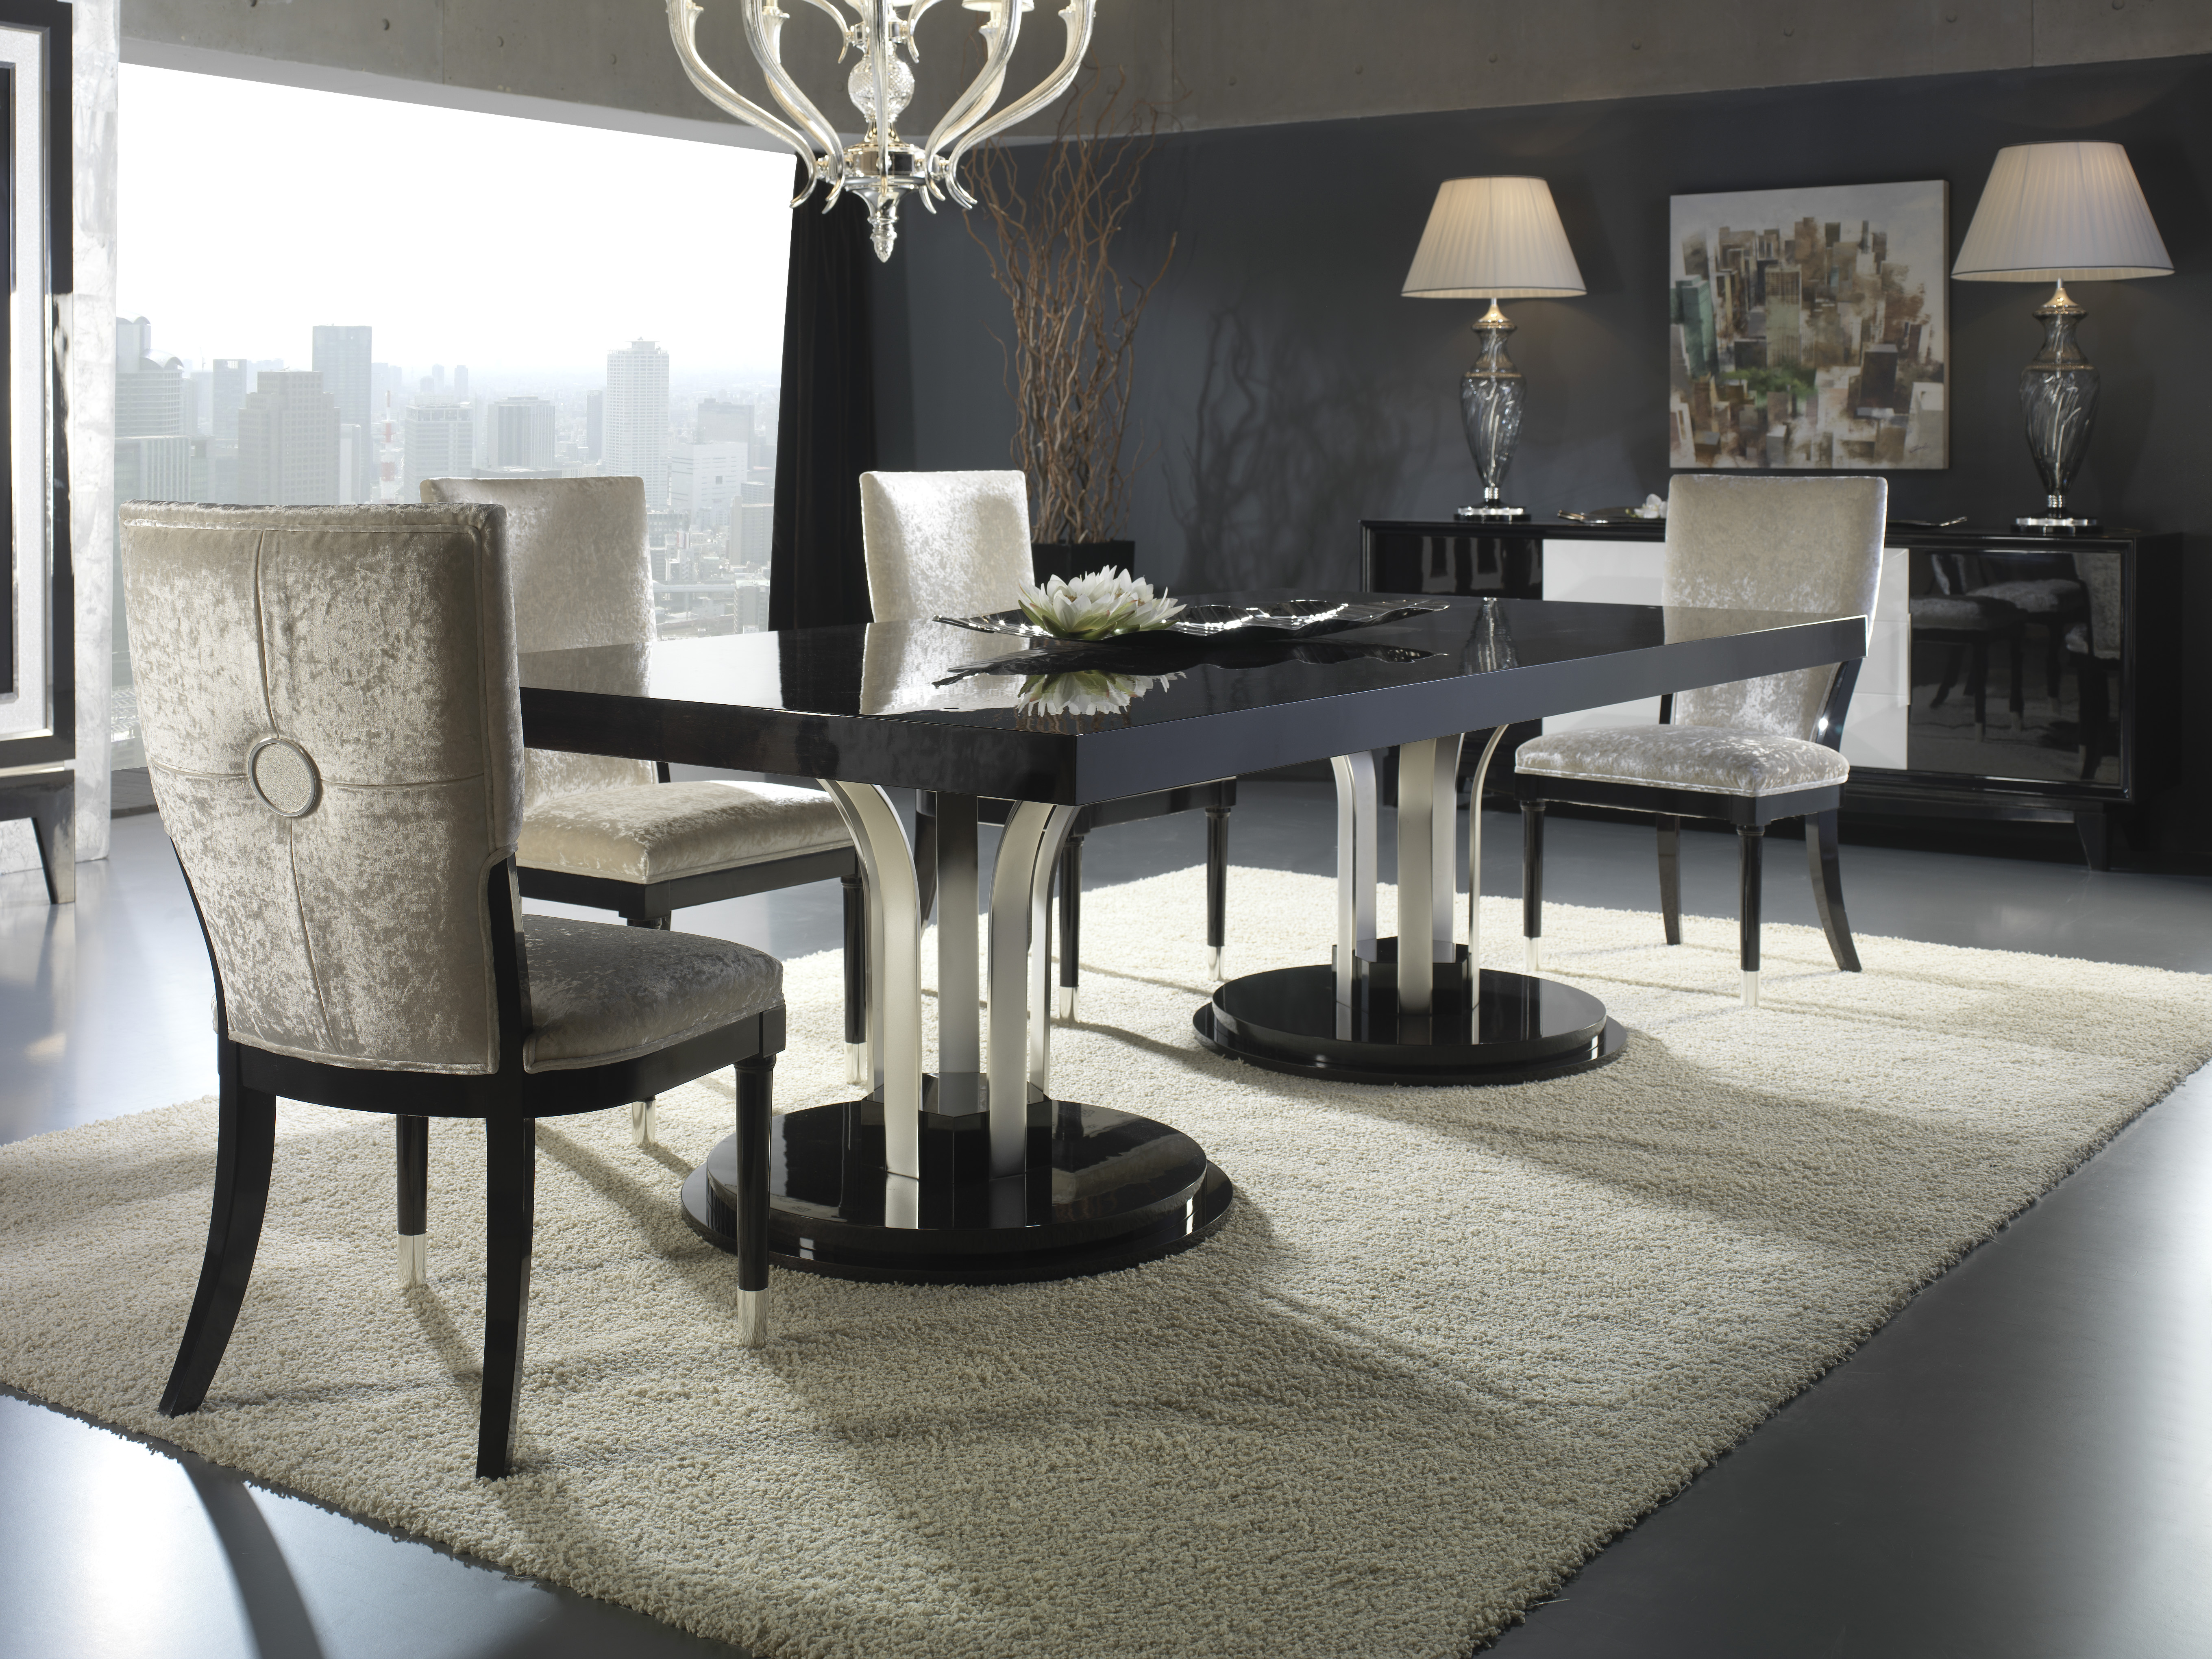 Creatice Modern Contemporary Dining Room Furniture with Simple Decor